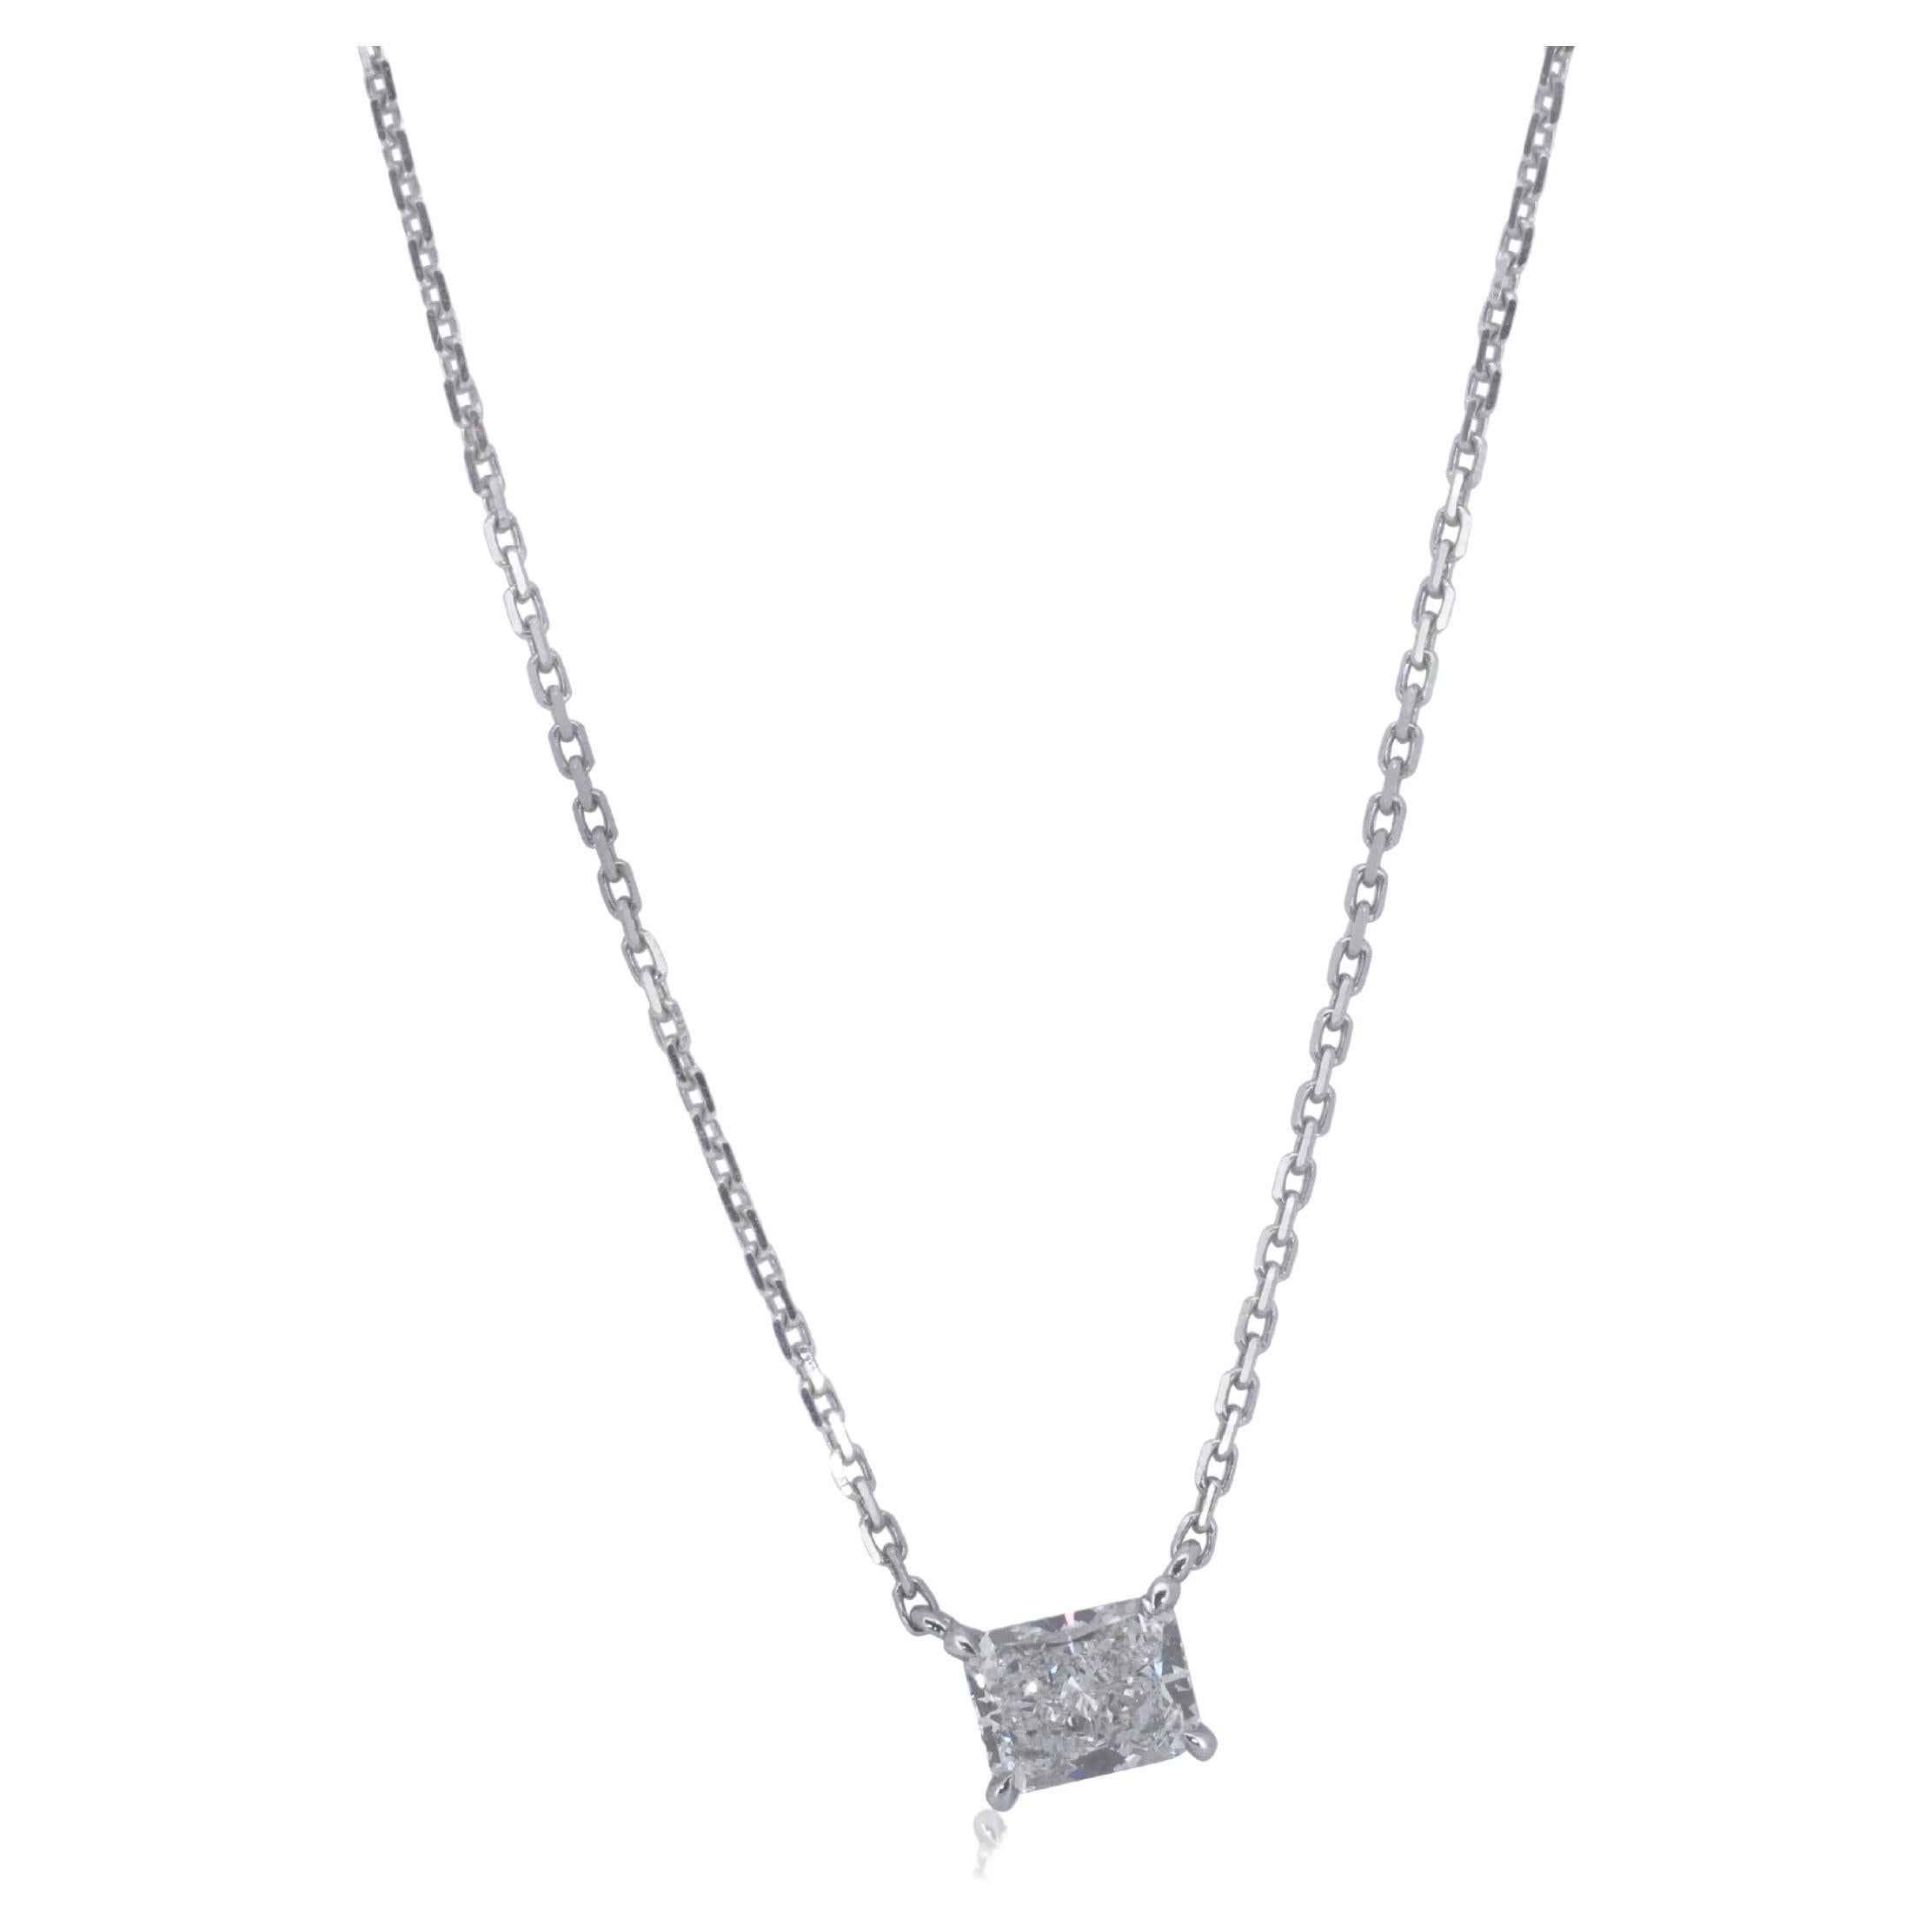 Elegant 18k White Gold Solitaire Necklace with 0.72 Carat of Natural Diamonds